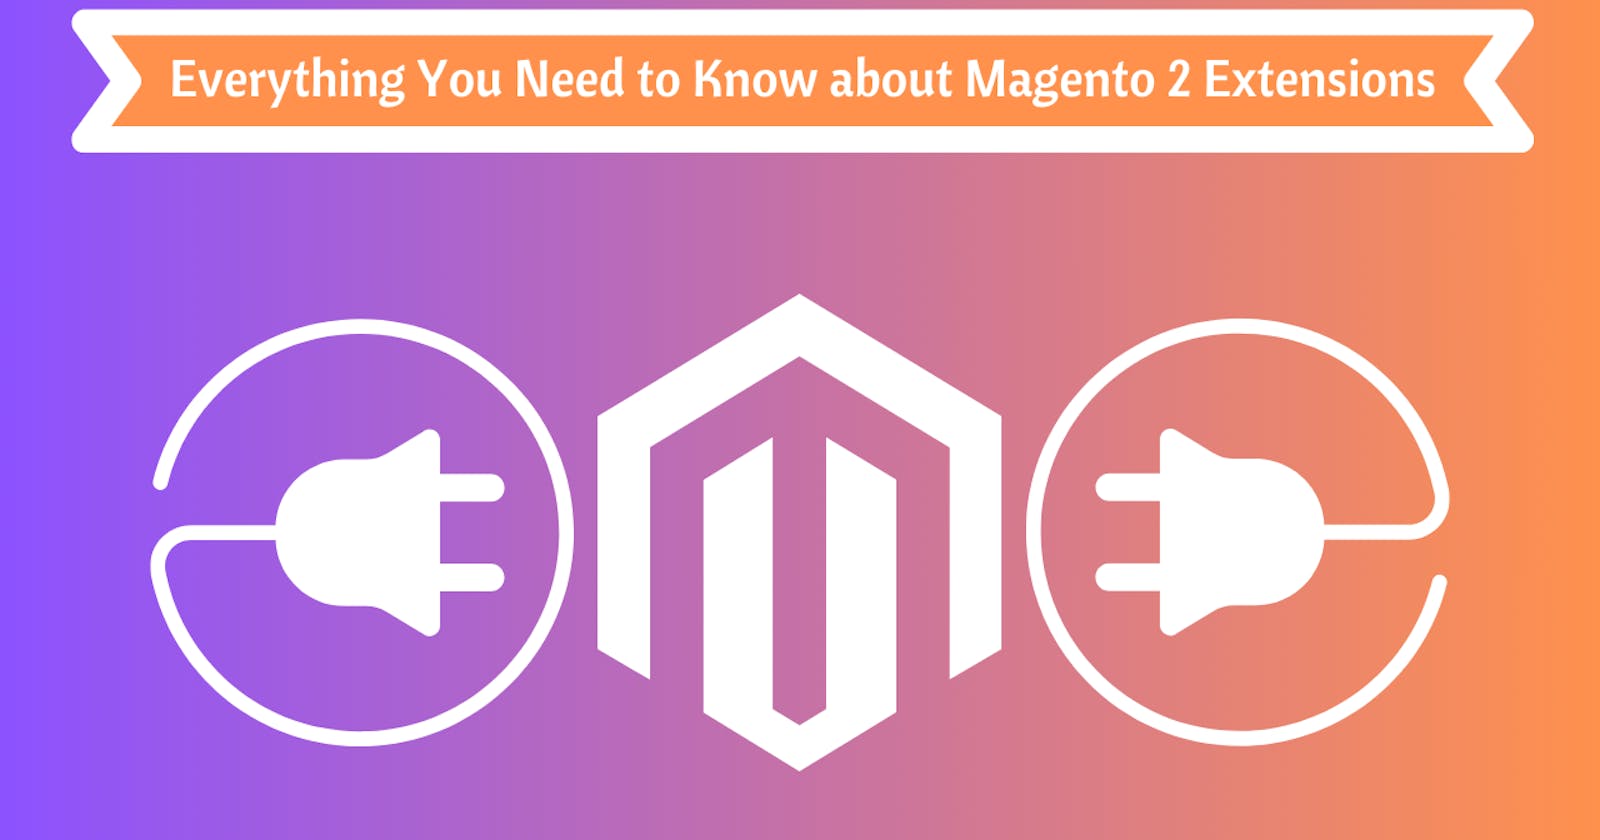 Everything You Need to Know about Magento 2 Extensions